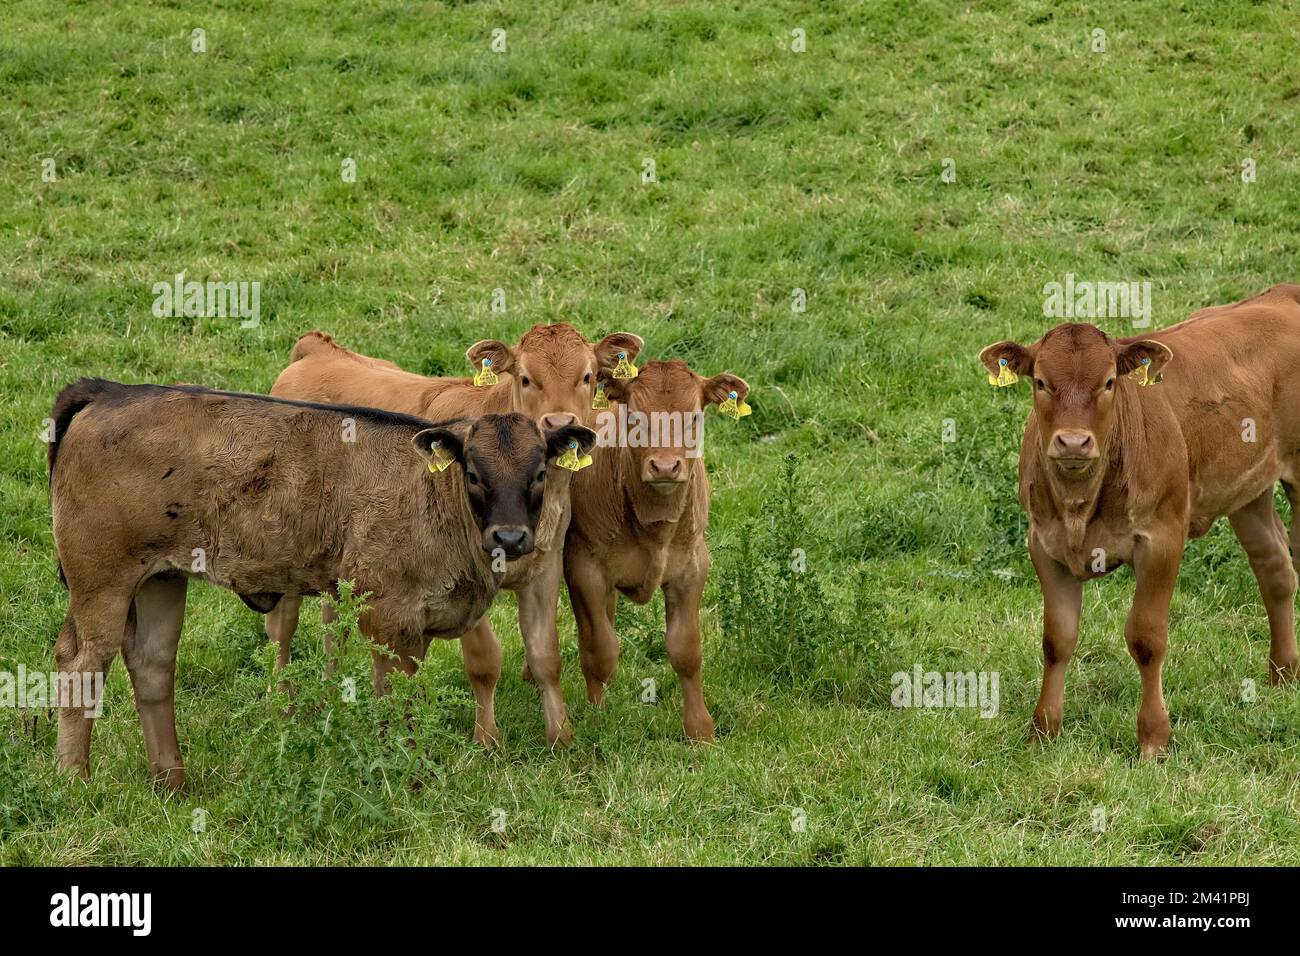 A herd of curious brown beef calves stands in a grassy farmer's field in Nidderdale, North Yorkshire, with yellow identification tags on their ears. Stock Photo